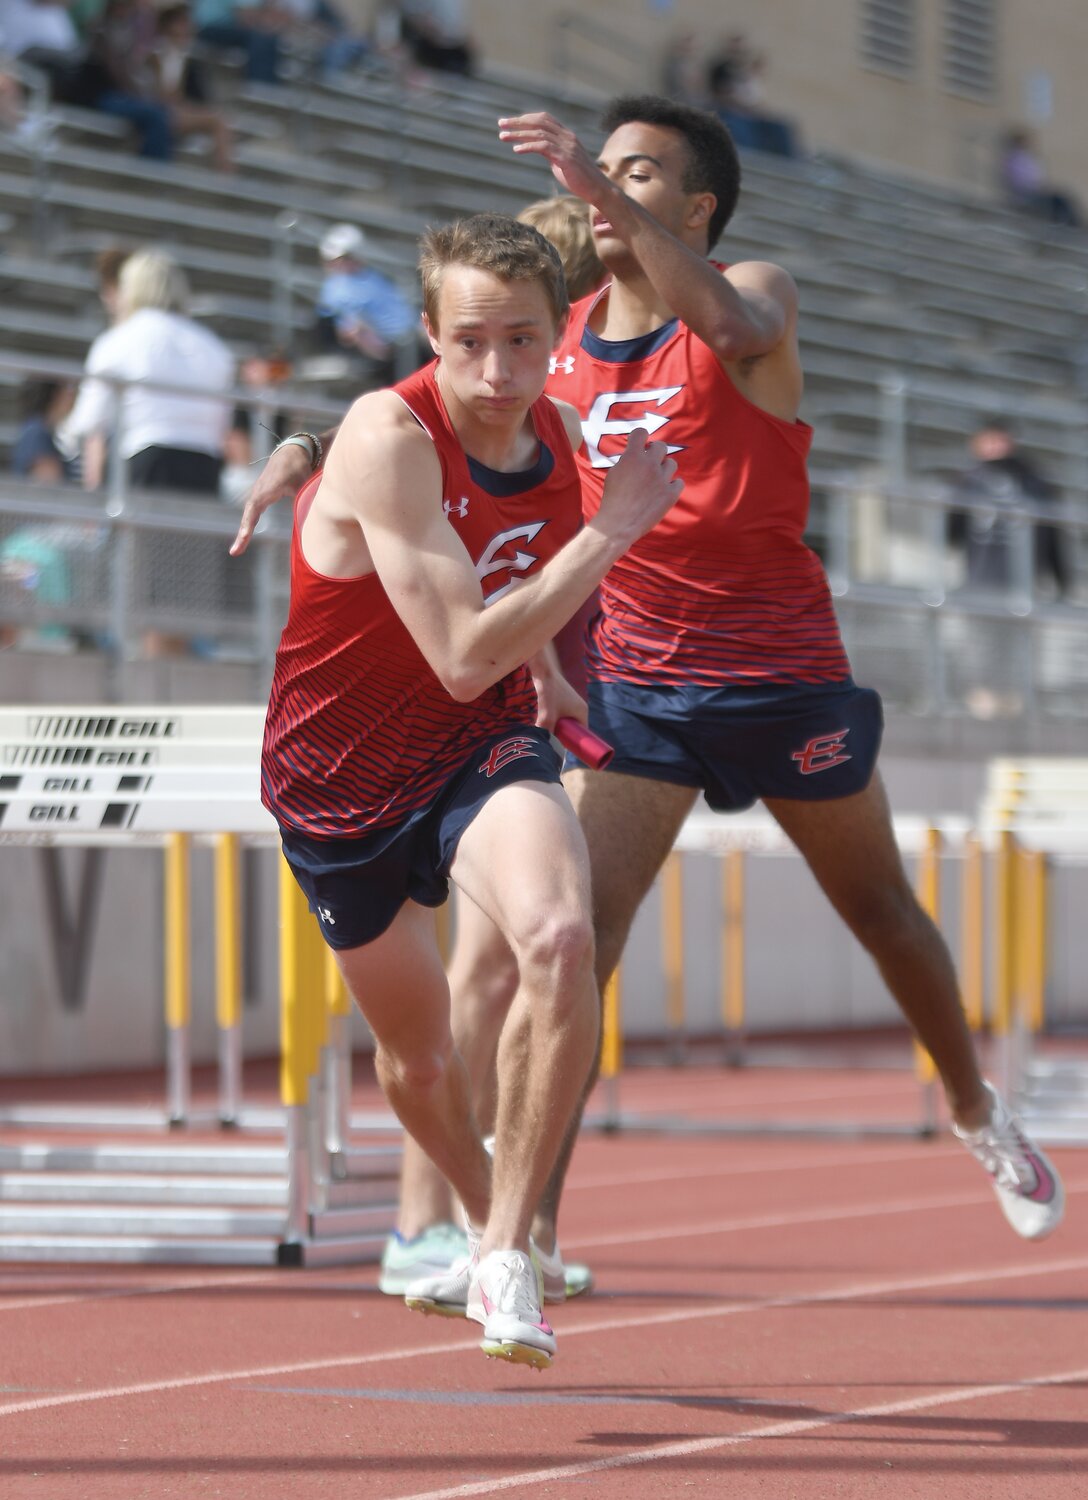 Aidan Conrad (front) takes the handoff from Jamar McDowell during the 4x800 at Saturday’s Davis Invite in Kaysville Utah.